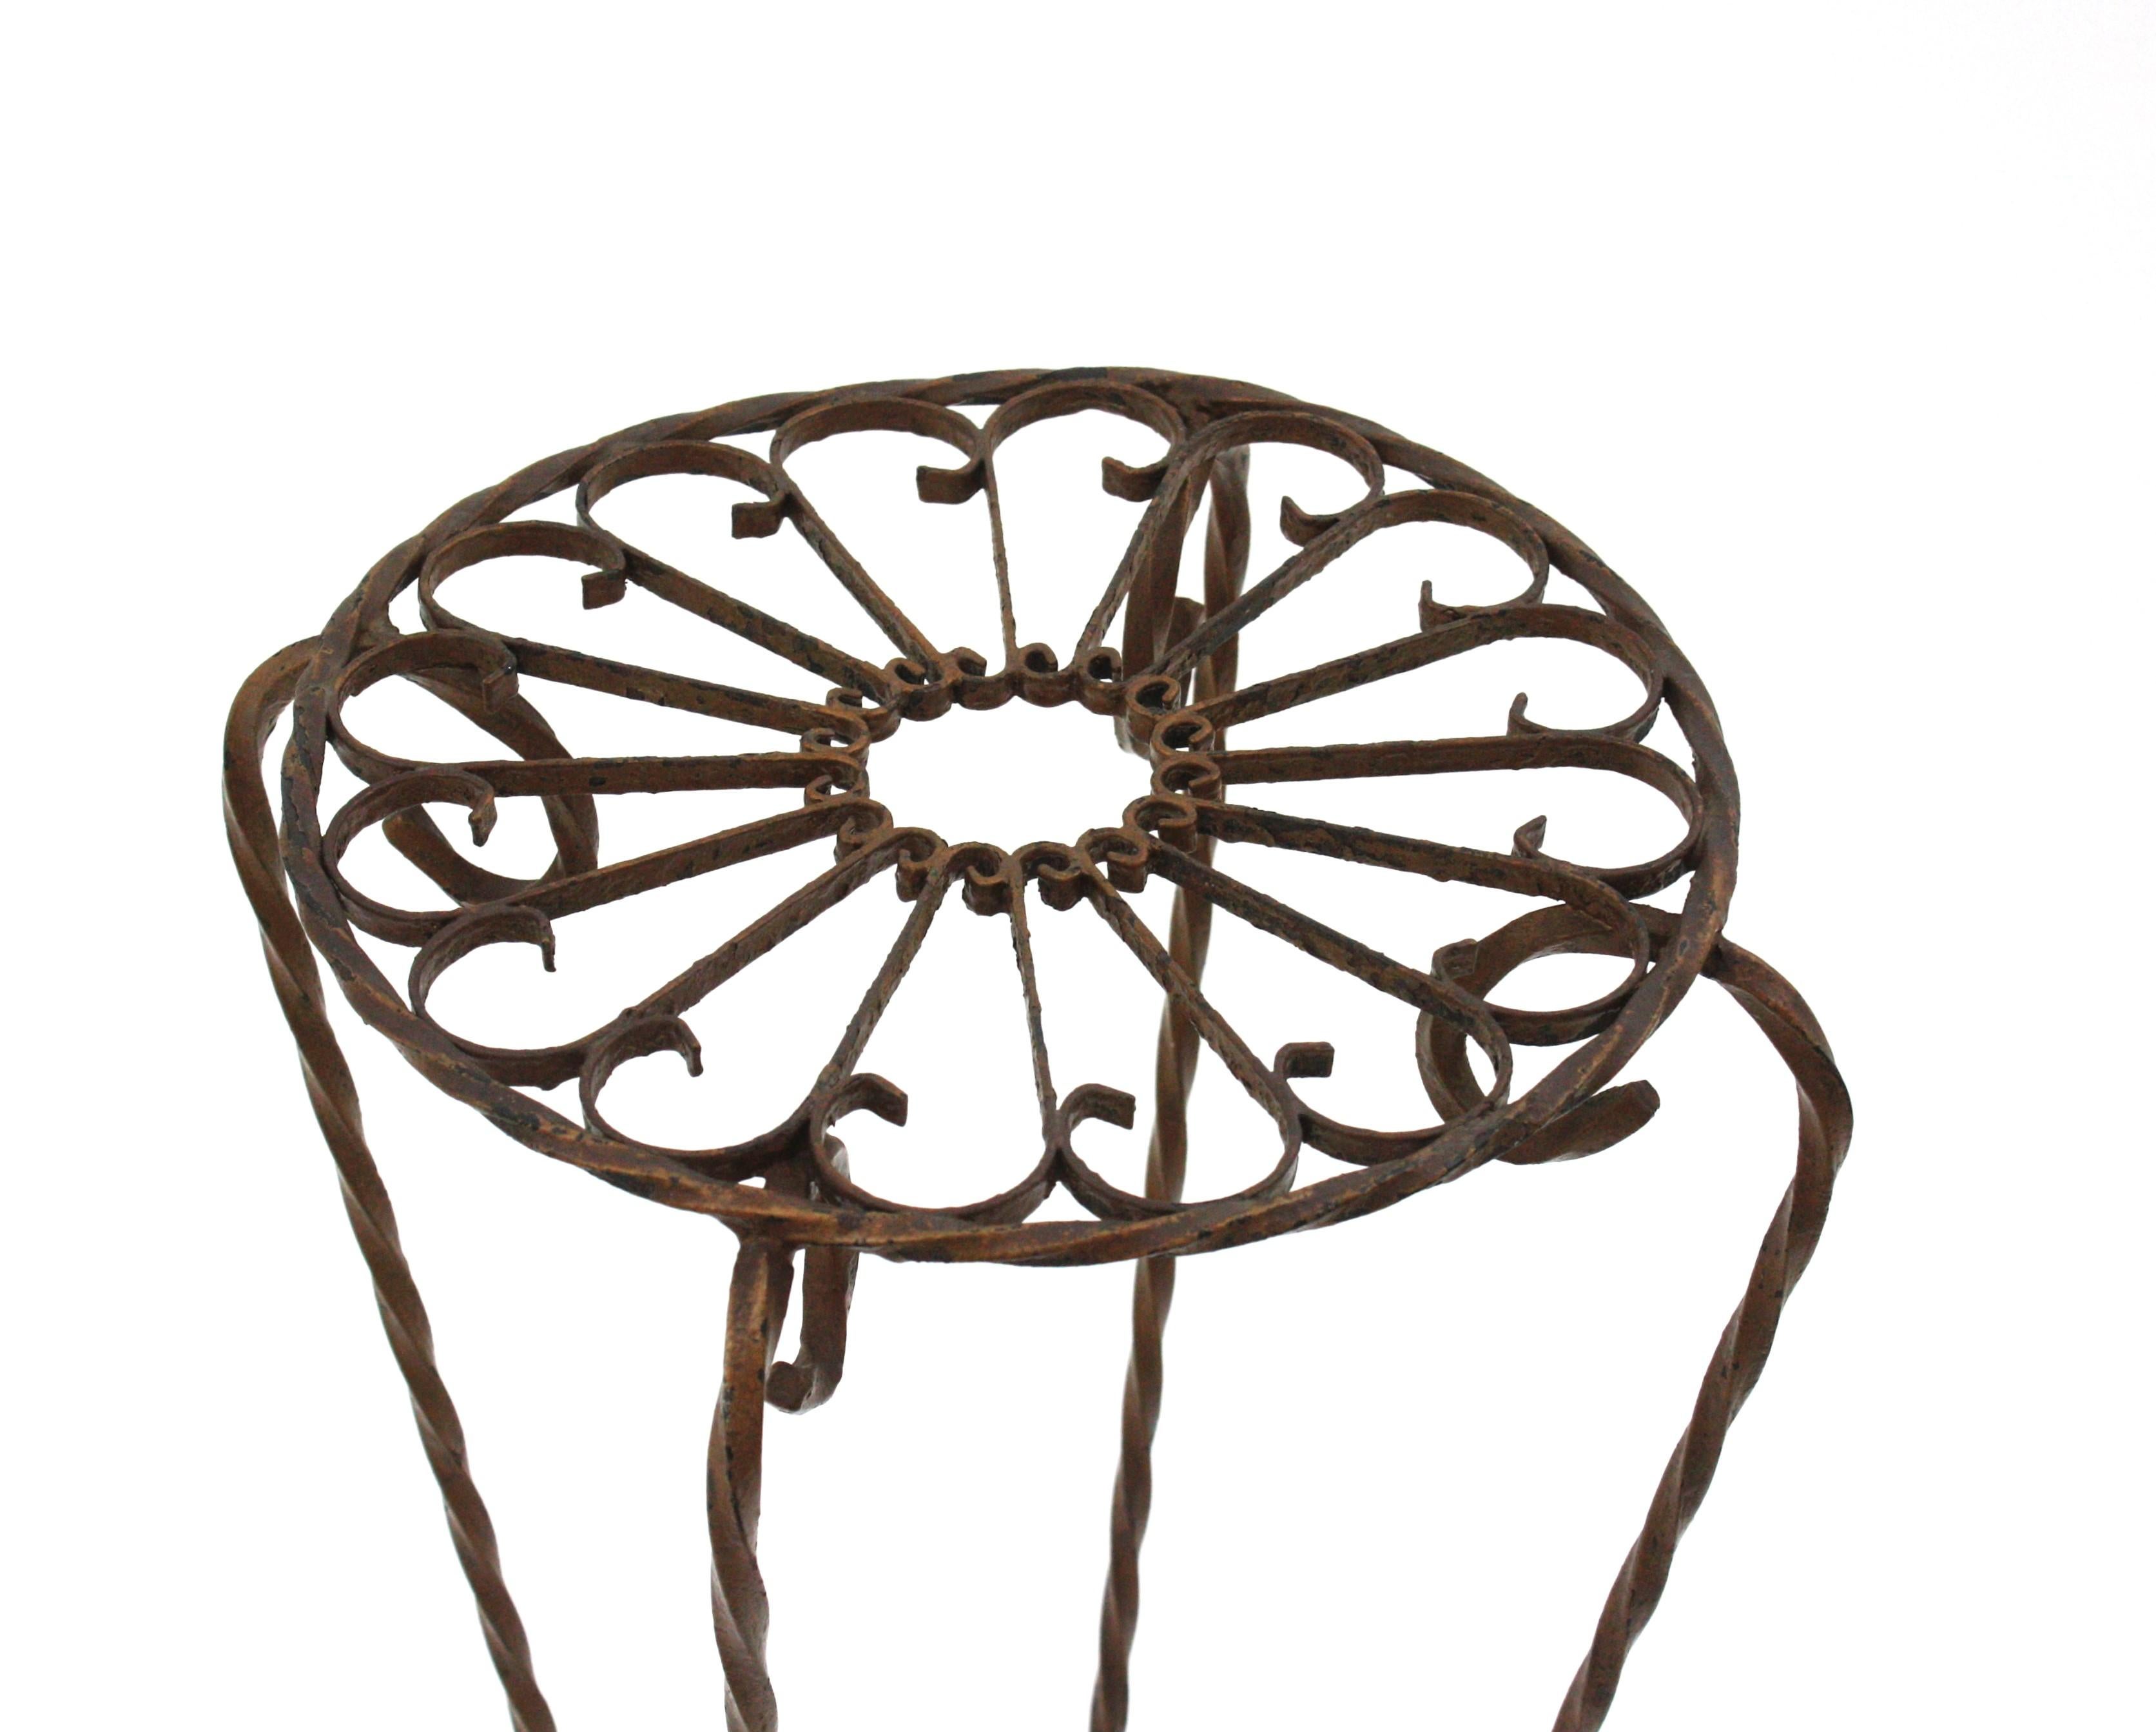 Spanish Scrollwork Wrought Iron Side Table / Drinks Table, 1950s For Sale 1